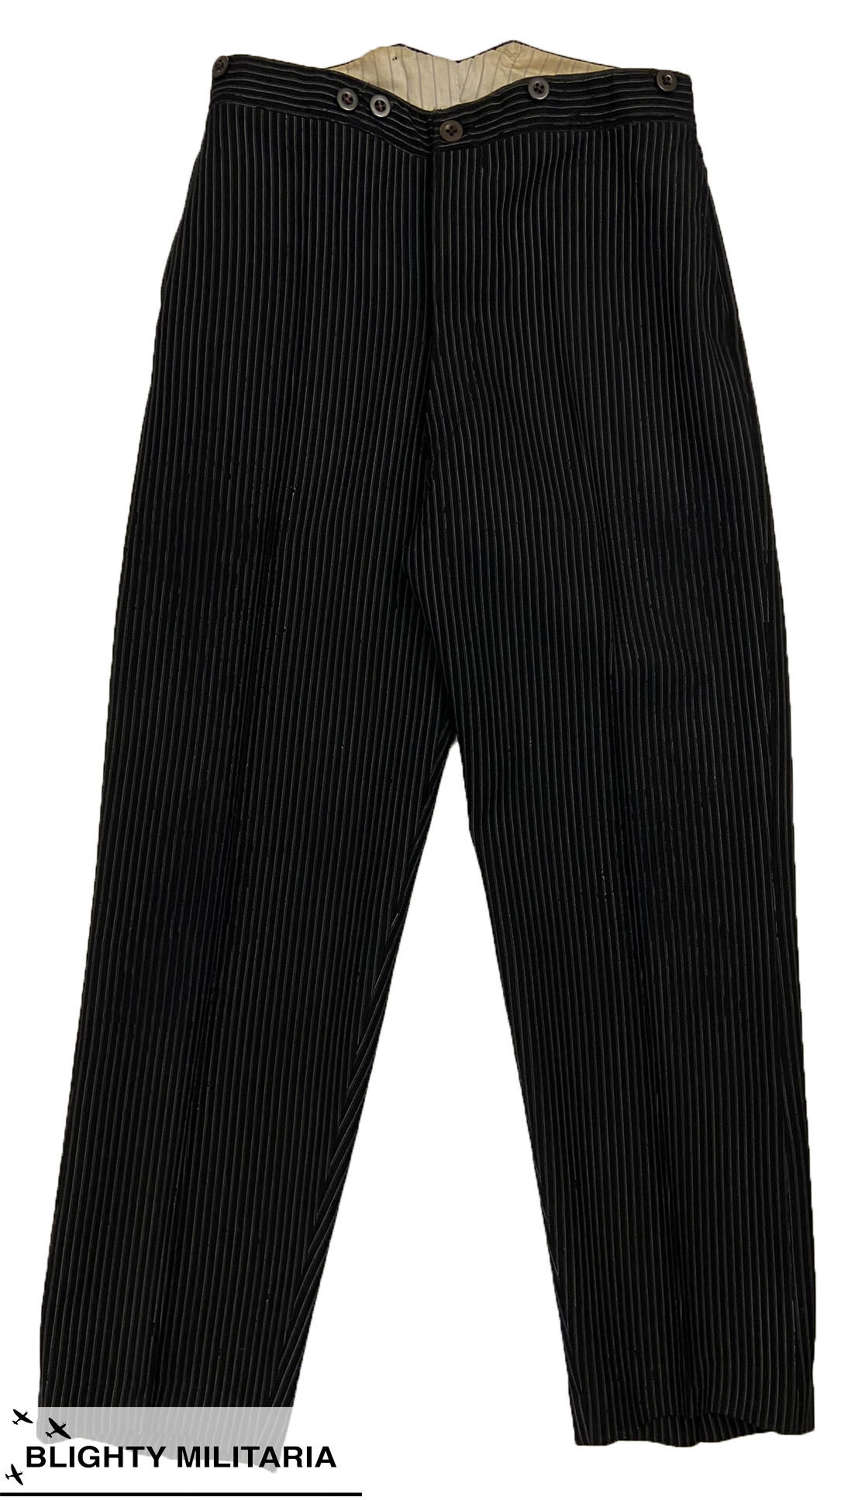 Original 1920s British Pinstriped Morning Trousers - Size 30x29